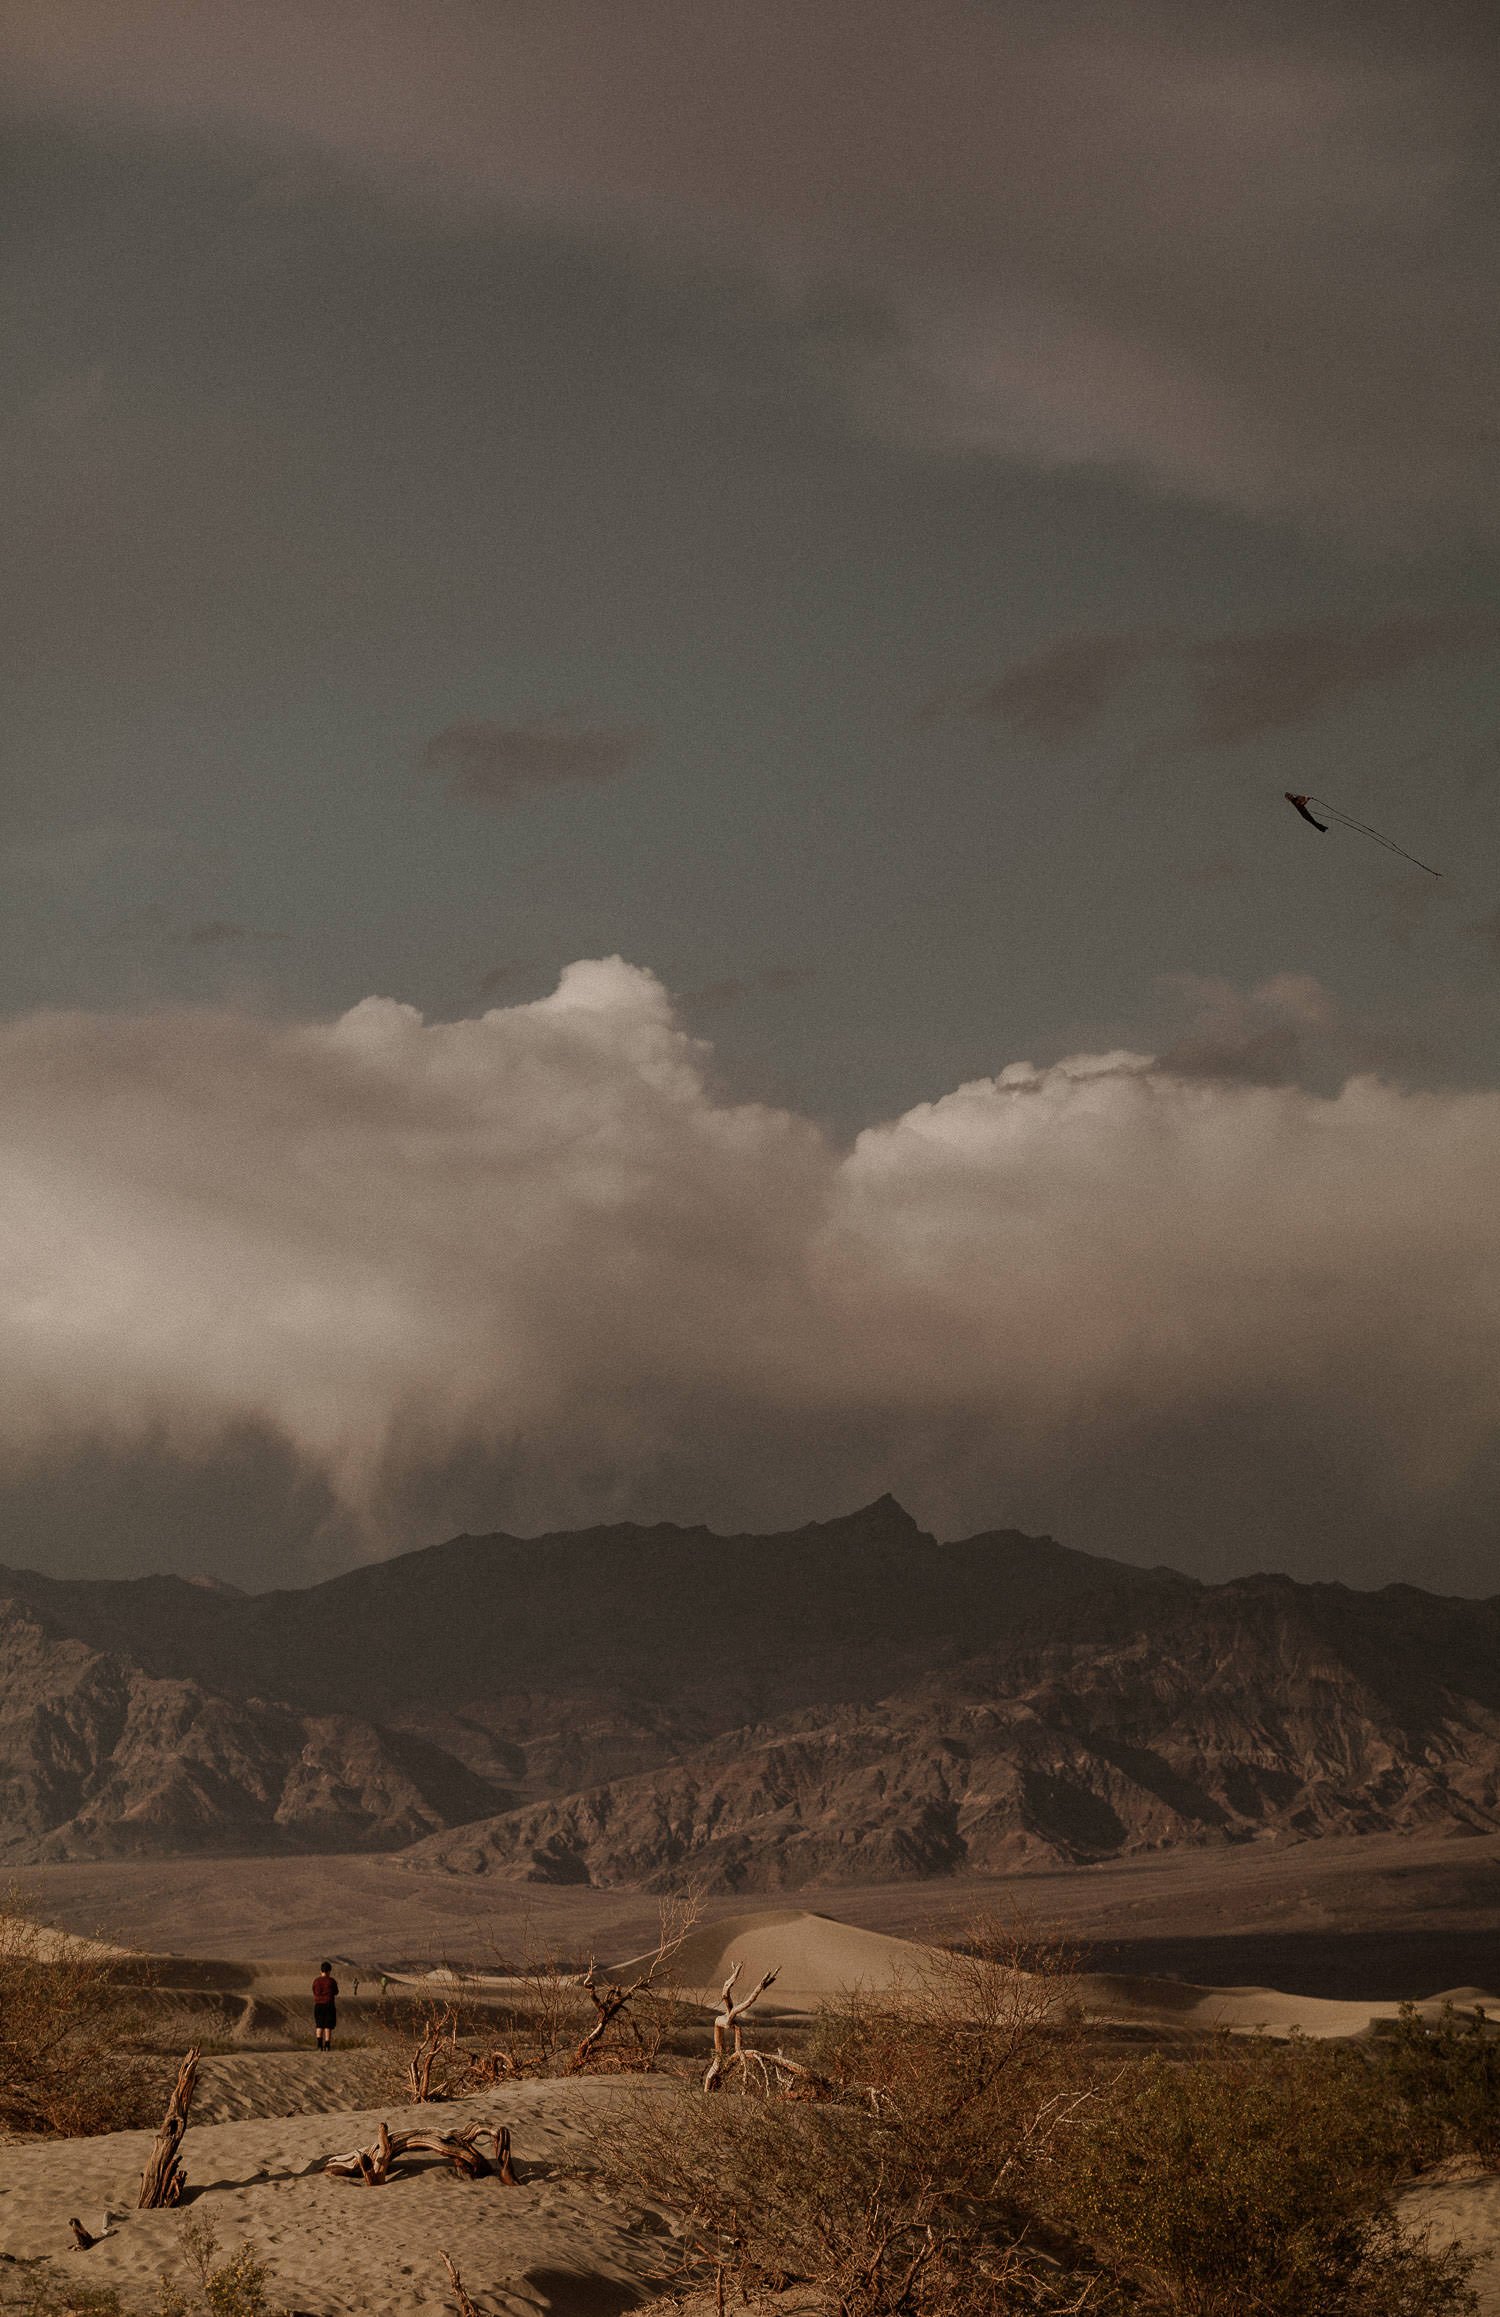 Sand Dunes landscape photo surrounded by mountains and clouds in the evening light. Lone man flies a red kite in the distance